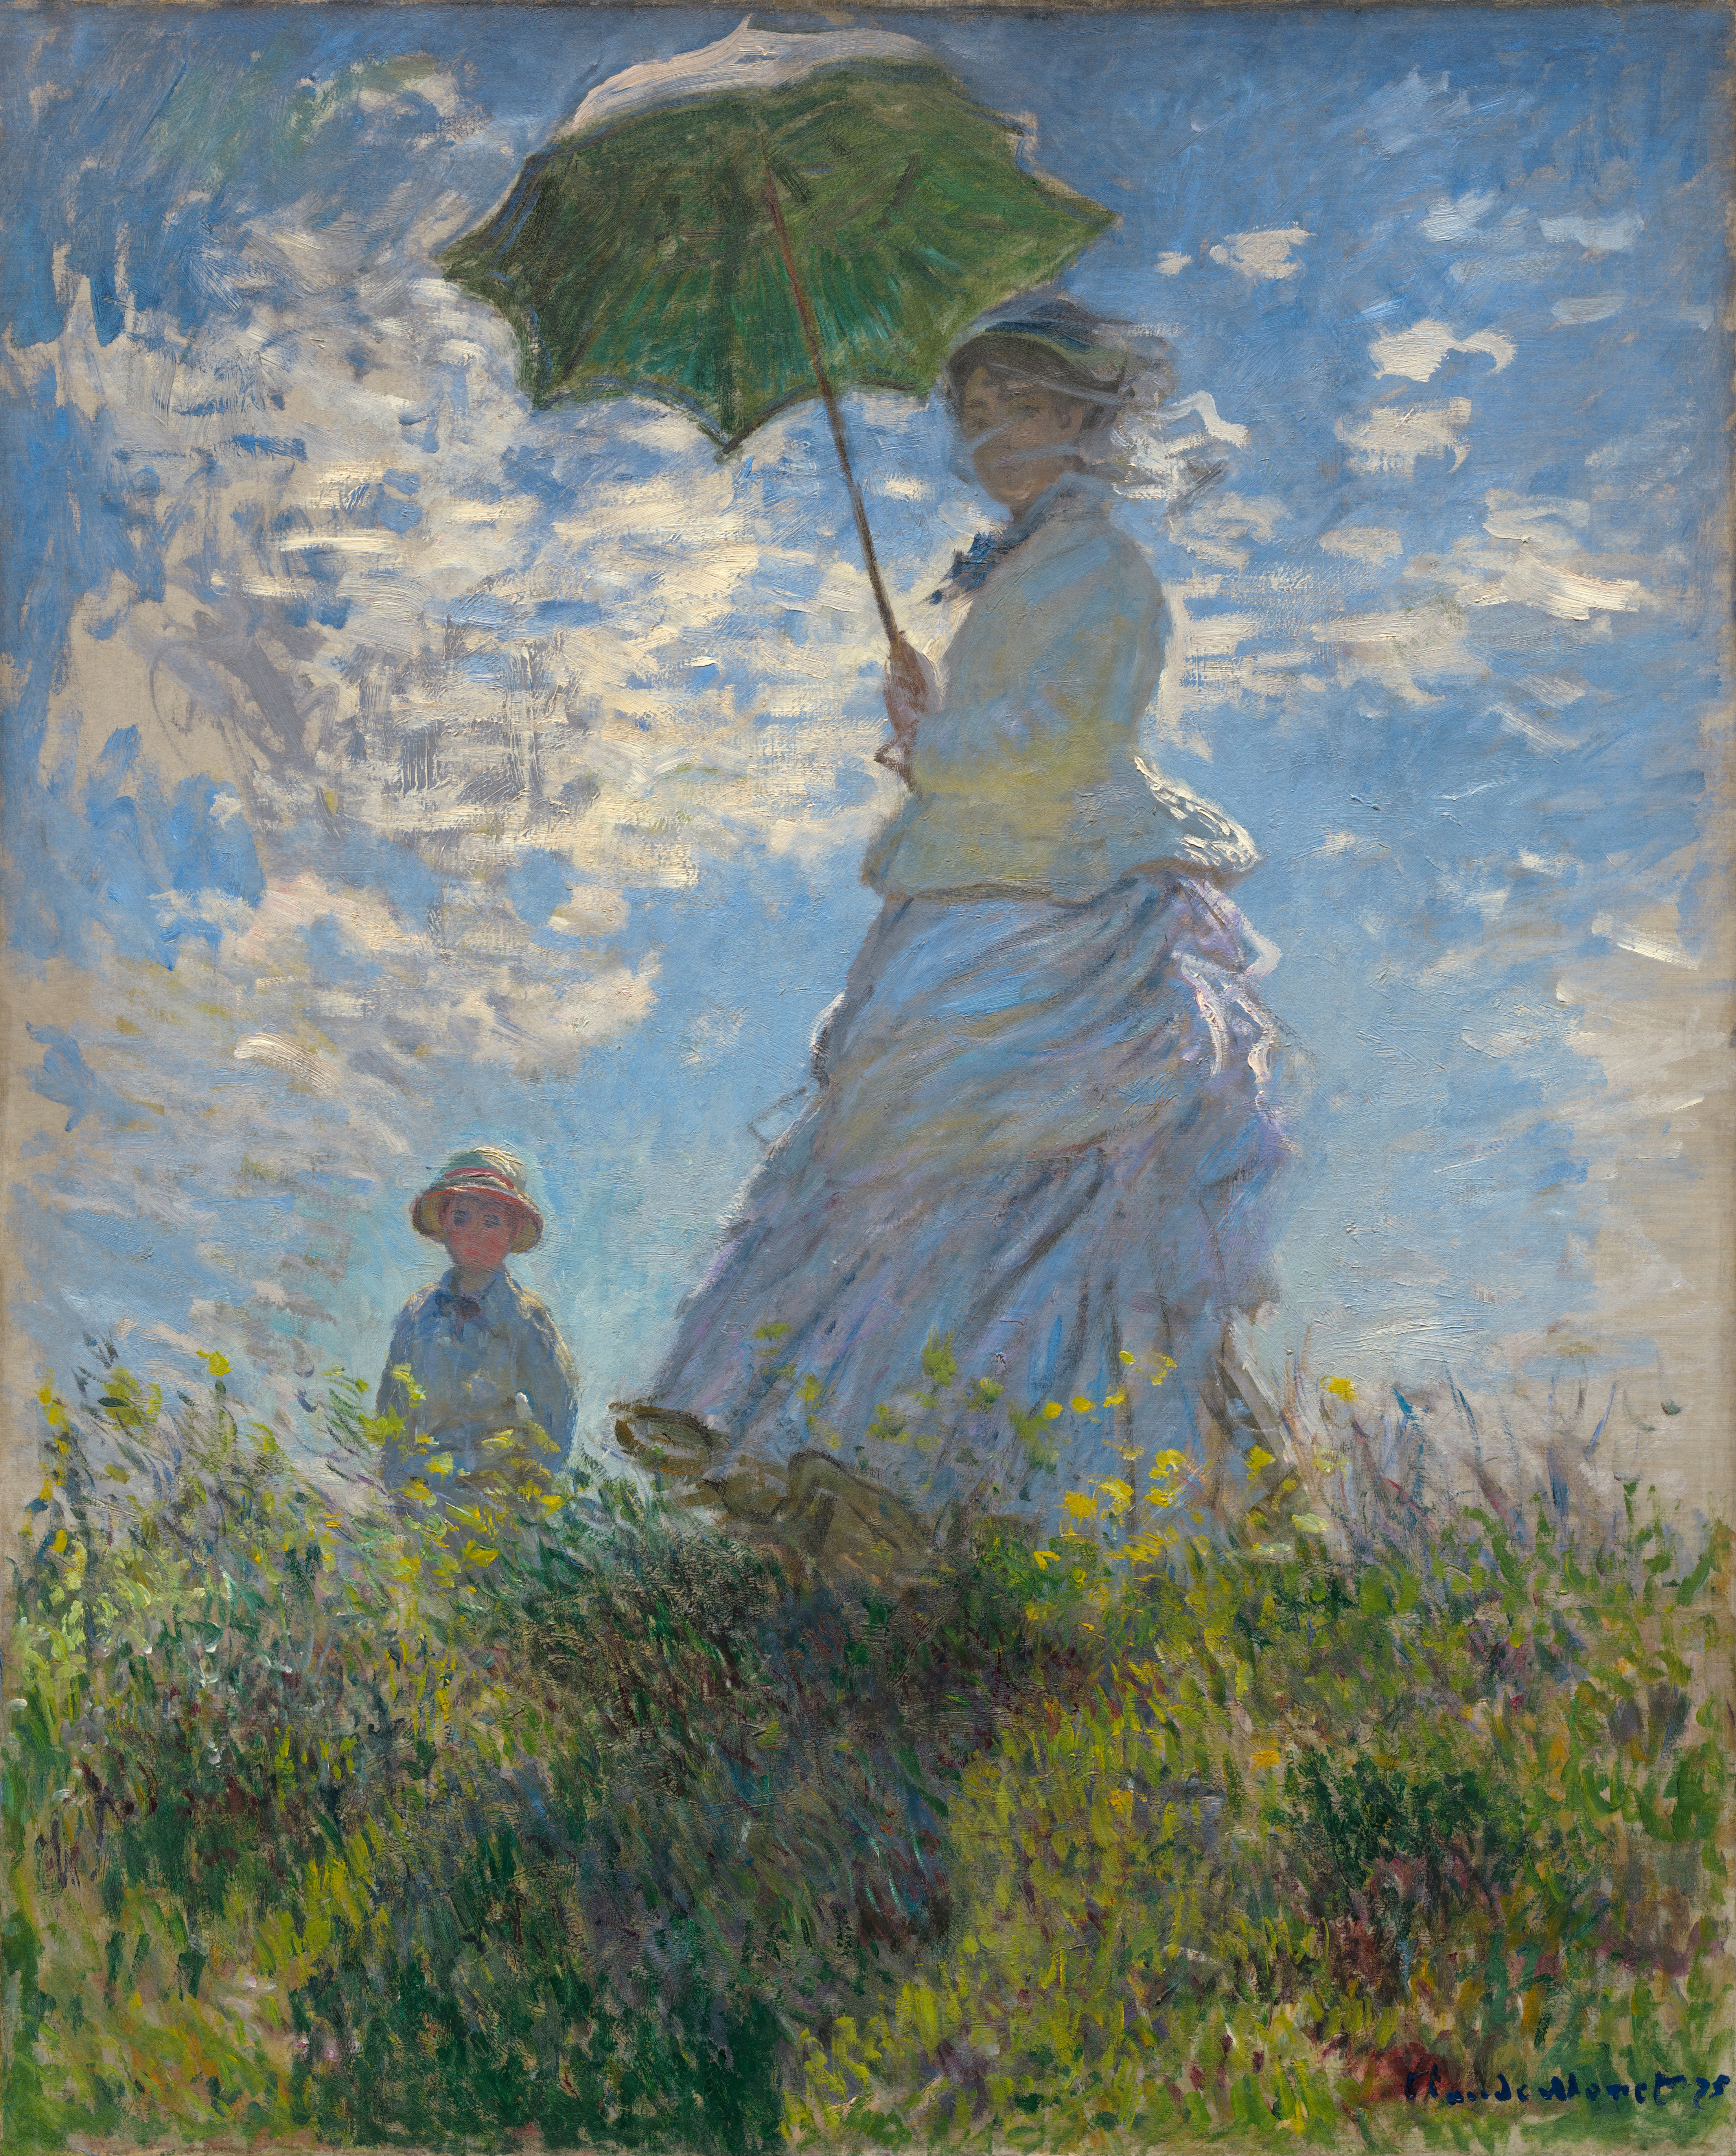 http://upload.wikimedia.org/wikipedia/commons/1/1b/Claude_Monet_-_Woman_with_a_Parasol_-_Madame_Monet_and_Her_Son_-_Google_Art_Project.jpg